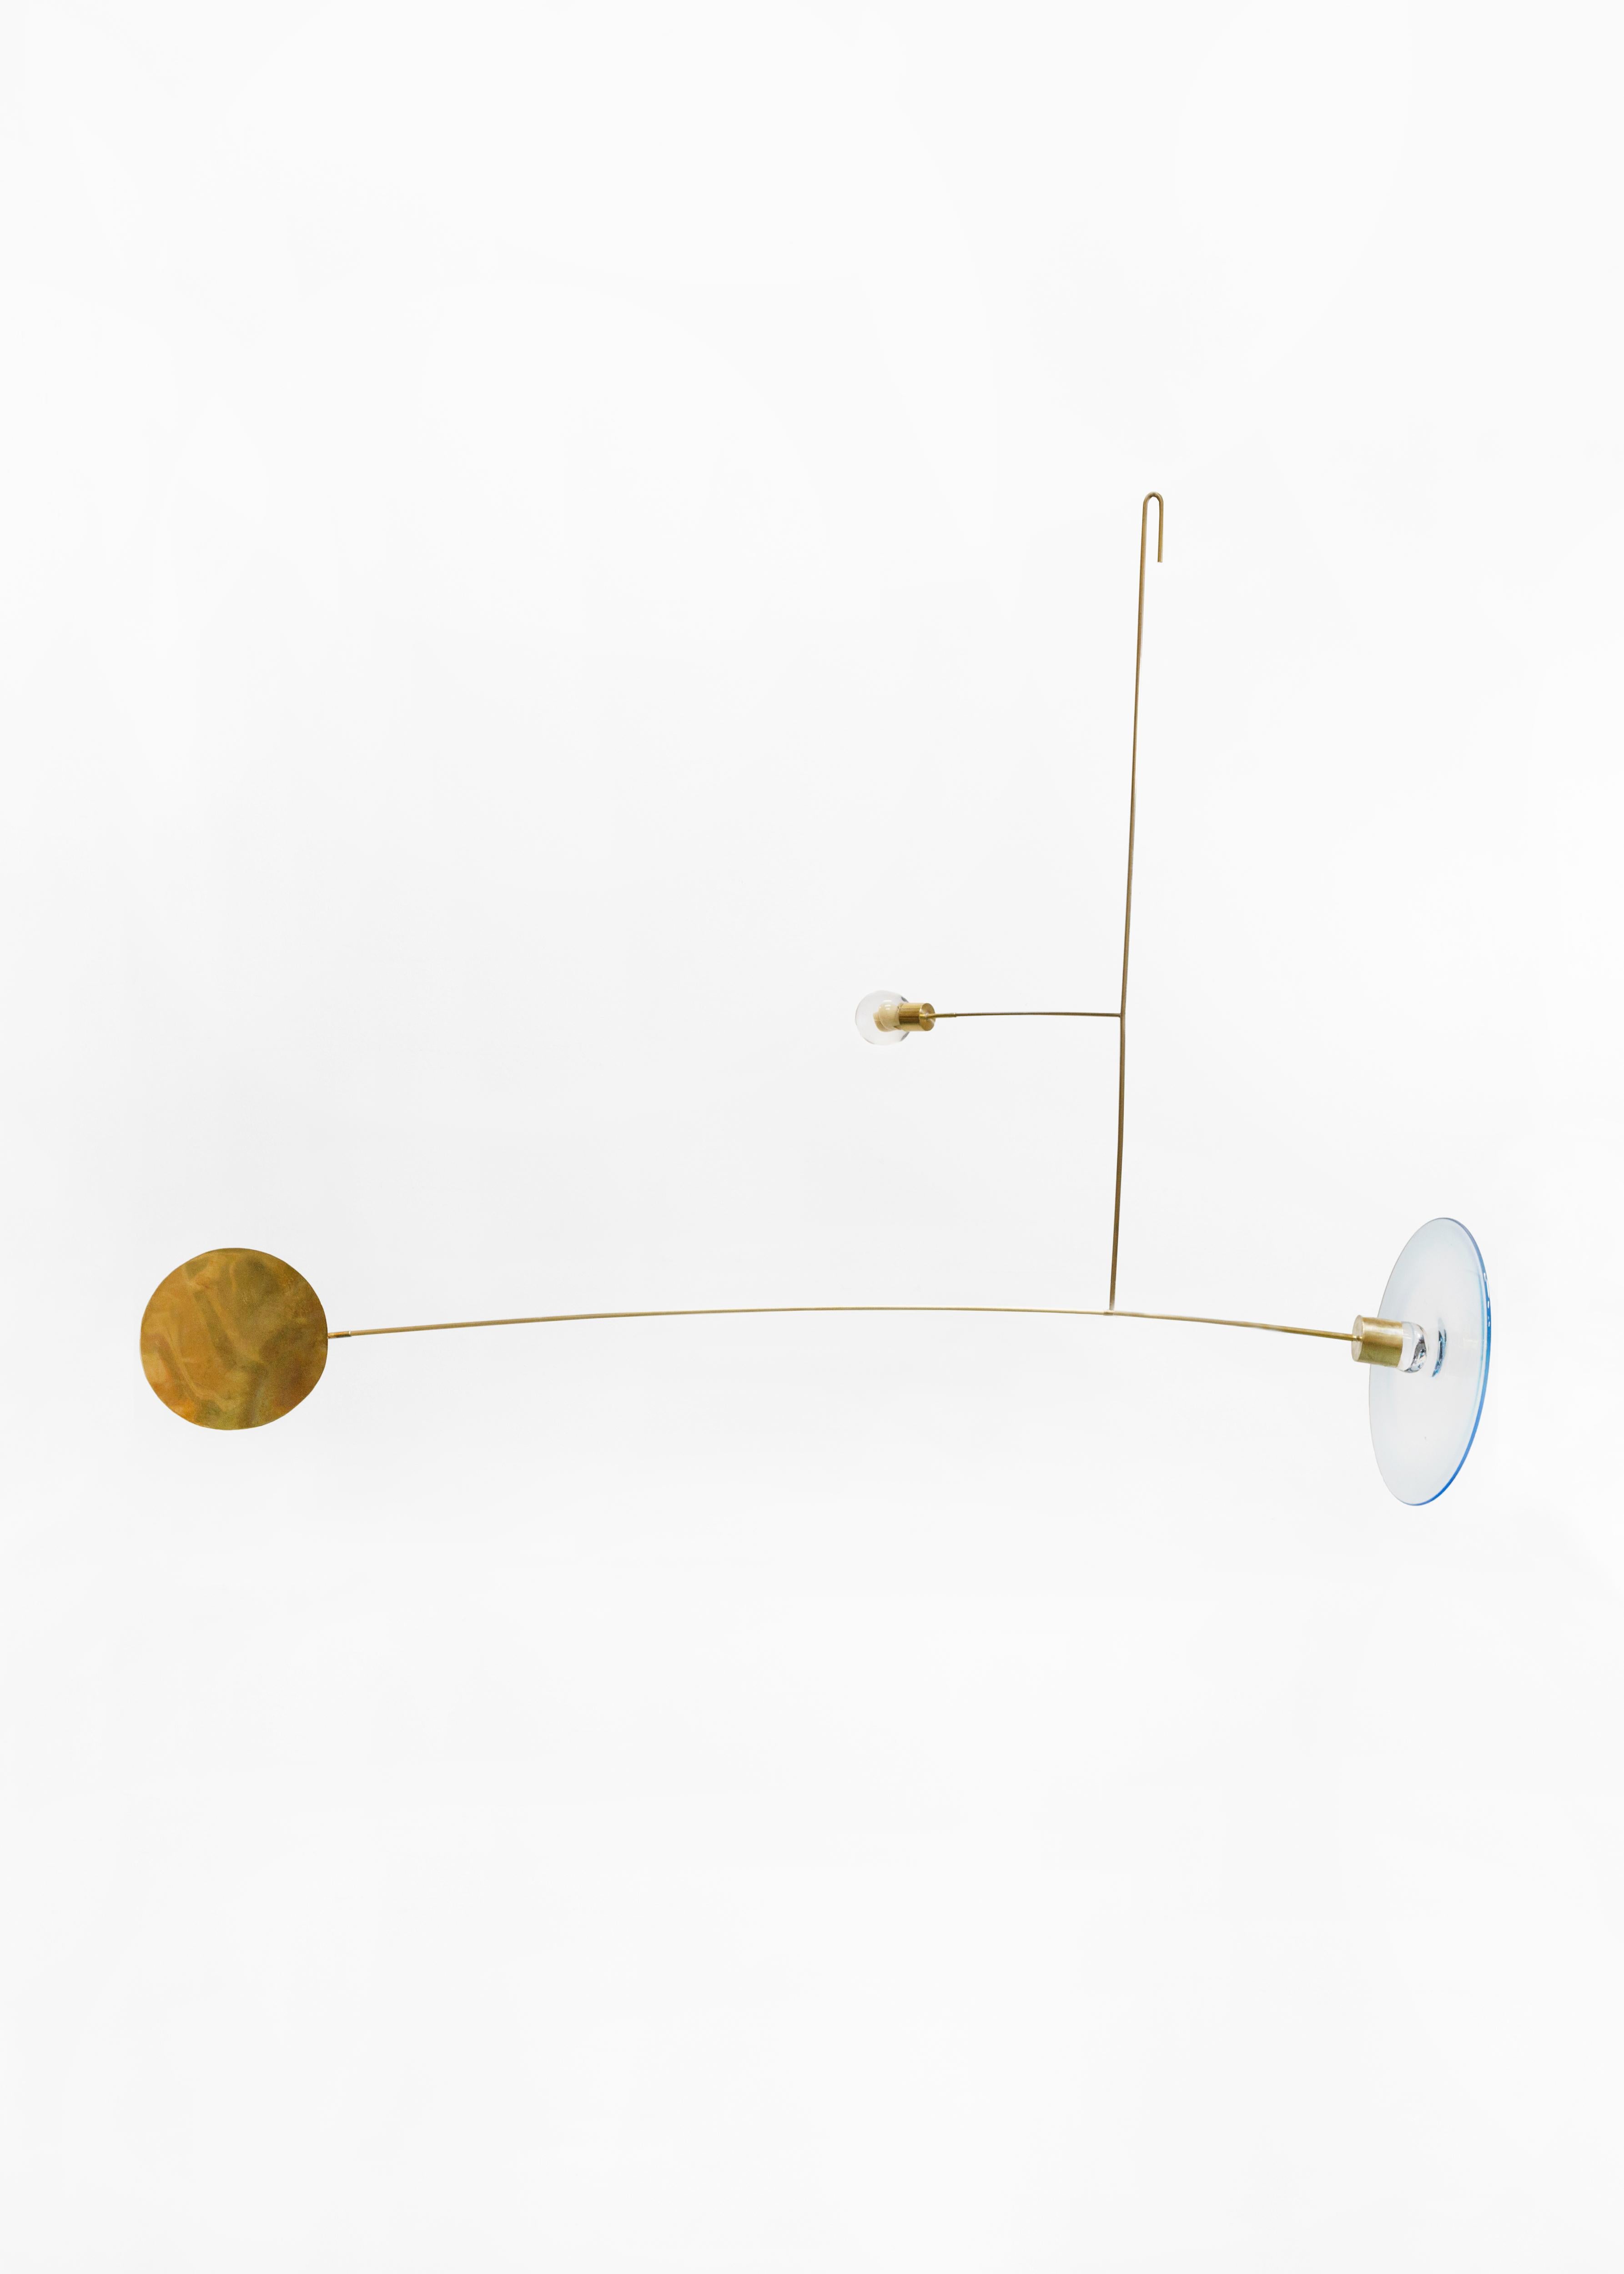 Glass mobile No. 86 - by Milla Vaahtera

Dimensions: 800 x 300 x 700cm
Weight: 300g

Dialogue is a series of mobiles and stabiles made of free-blown glass and hand-worked brass.

Vaahtera began to work on this series in May 2017 together with